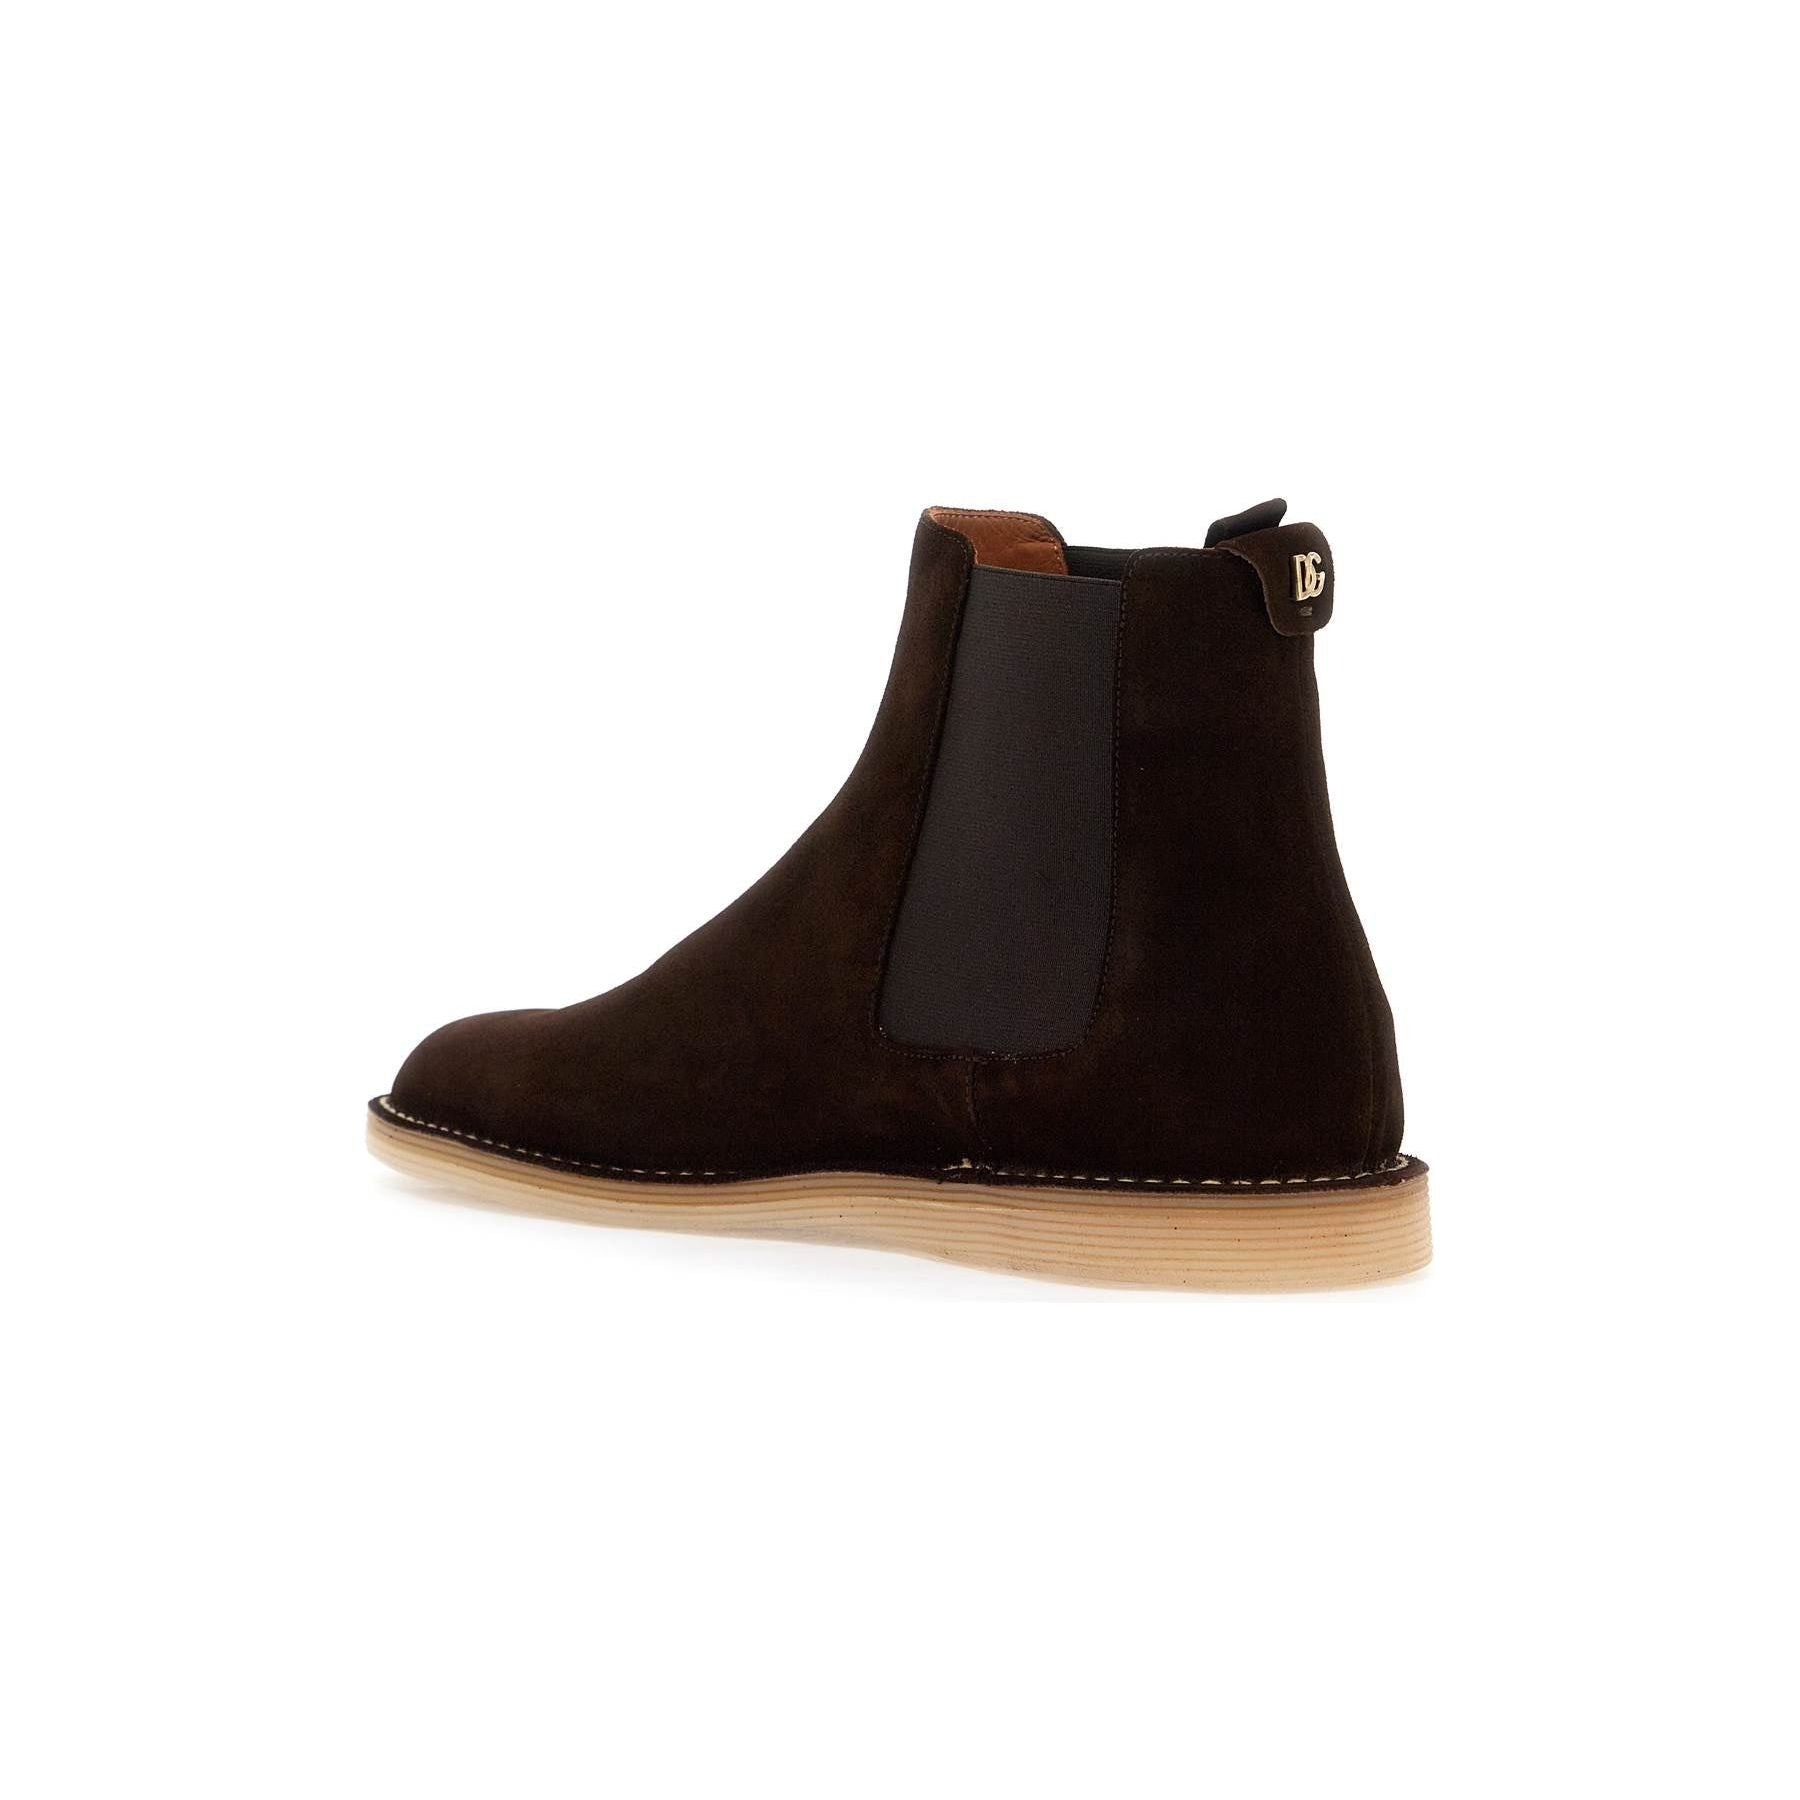 Suede New Florio Ideal Ankle Boots